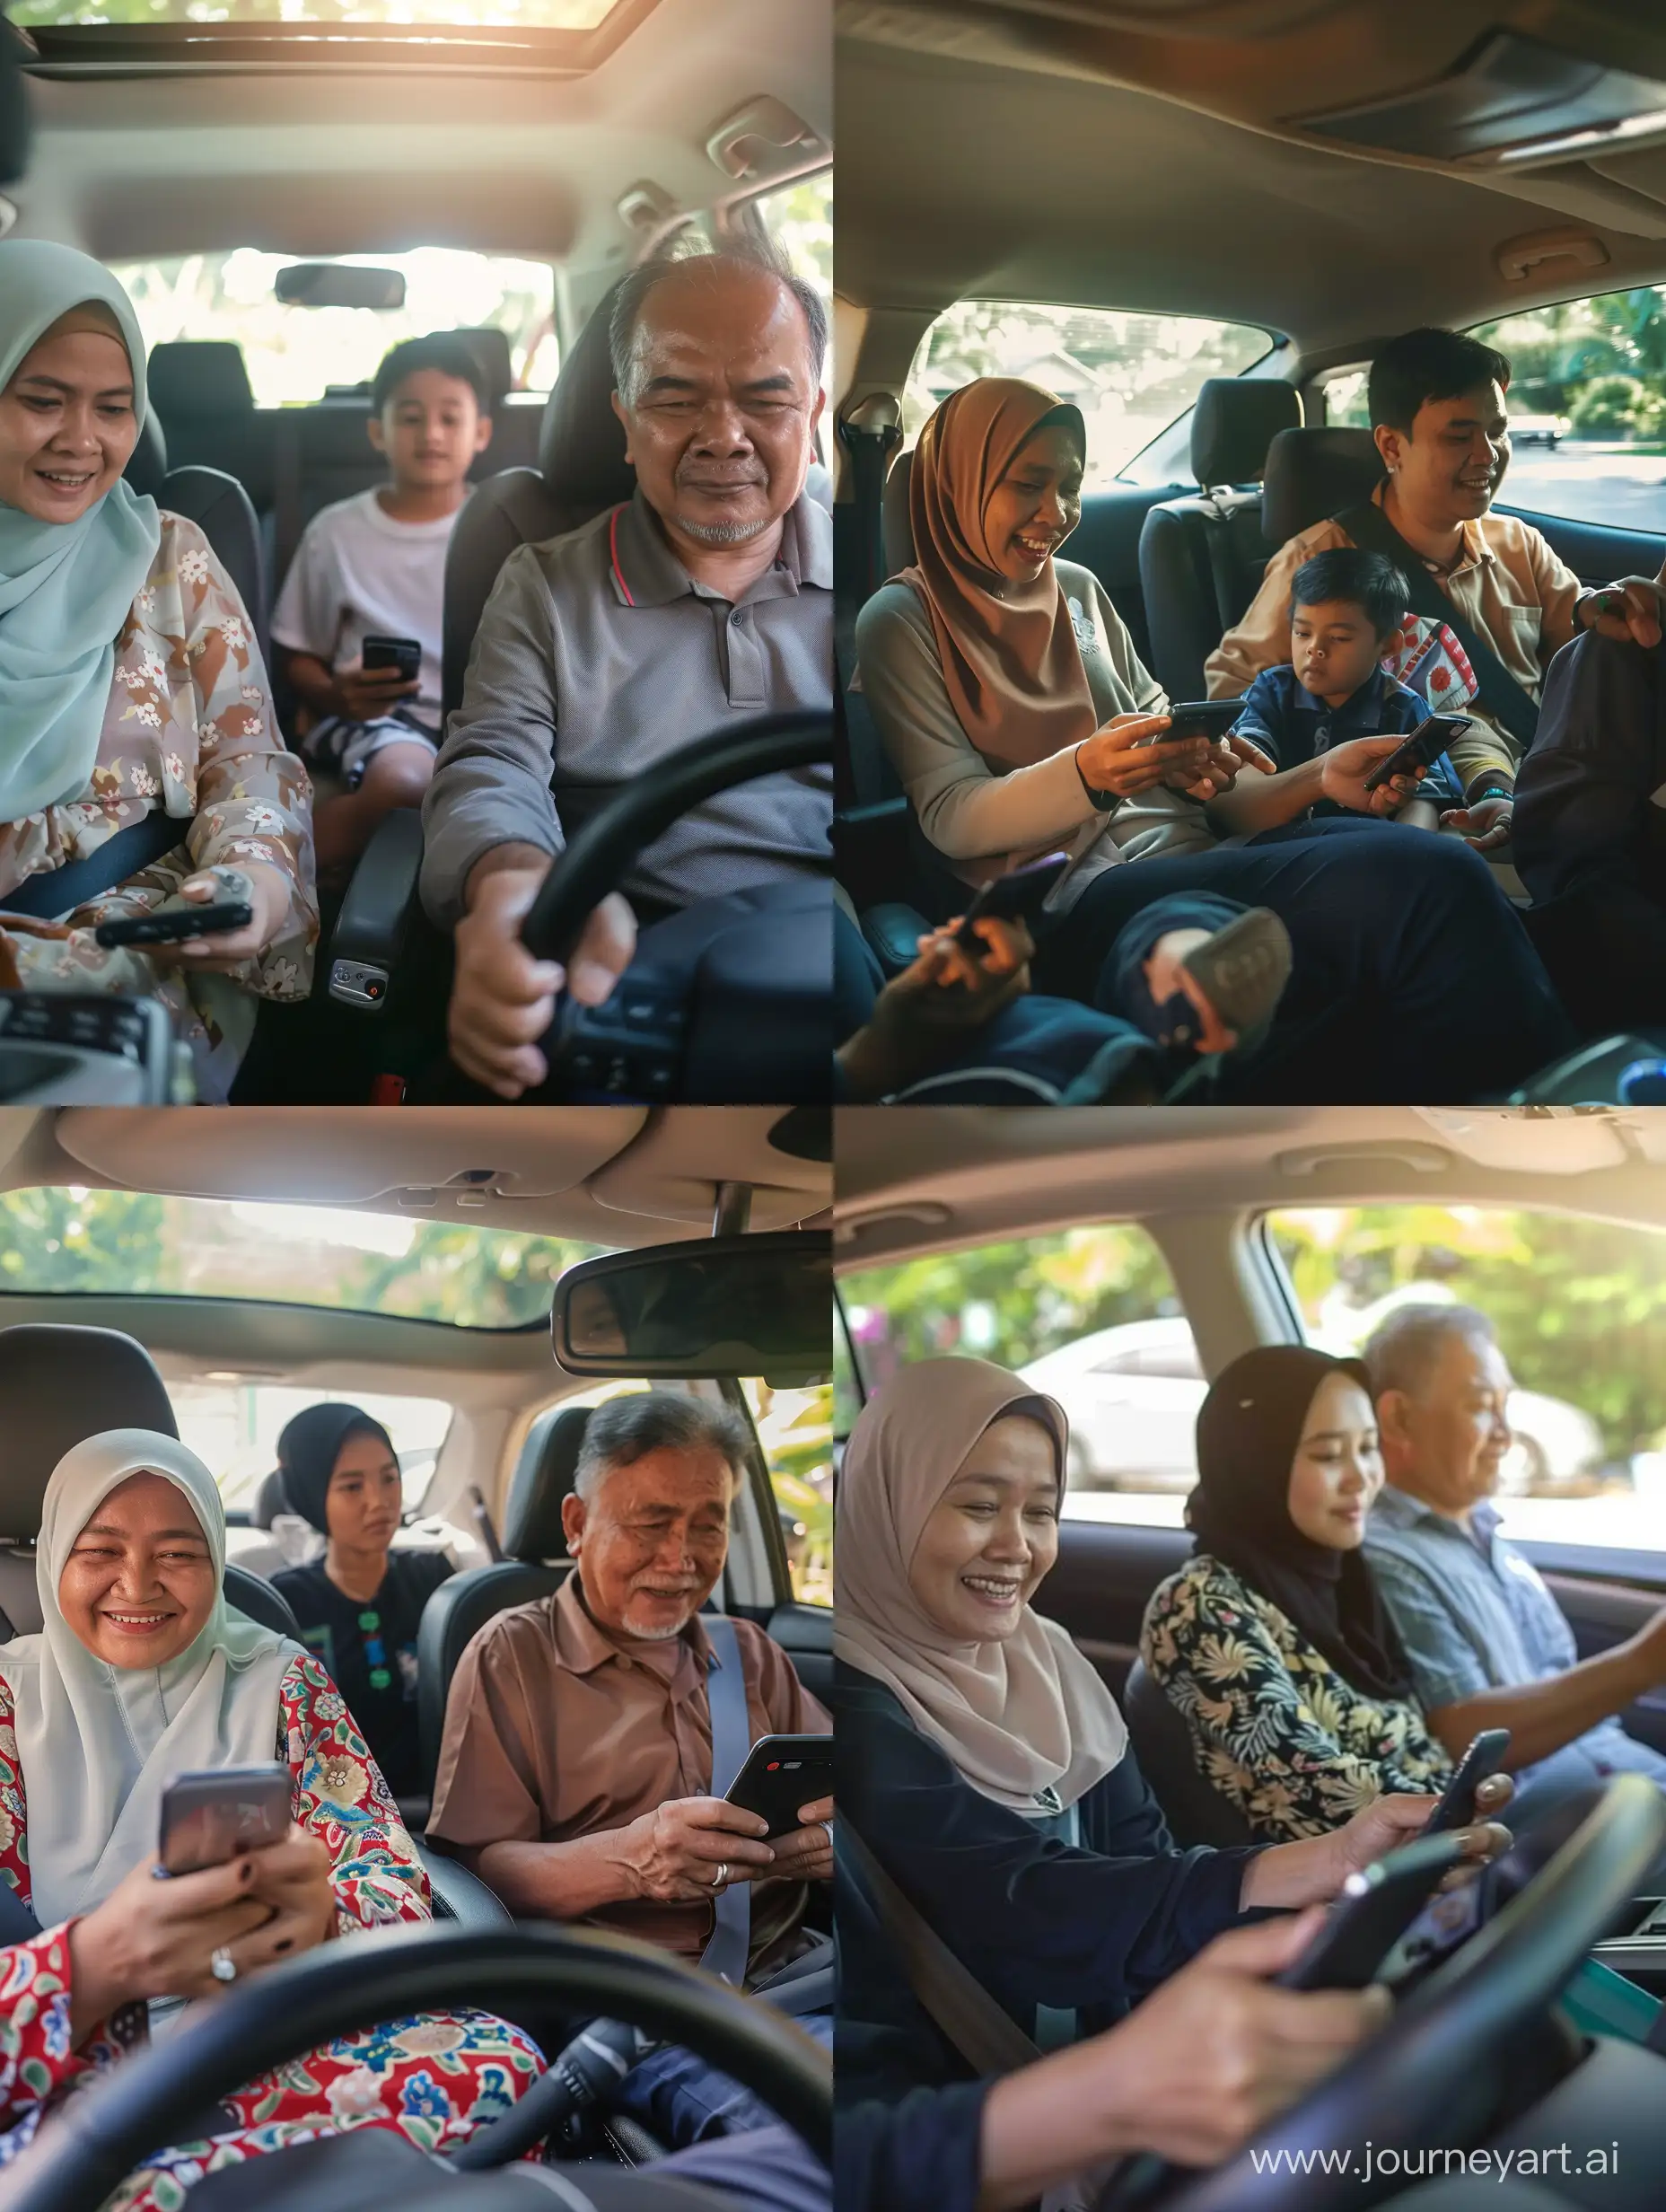 Malay-Family-Vacation-Connected-Yet-Distant-in-Car-Atmosphere